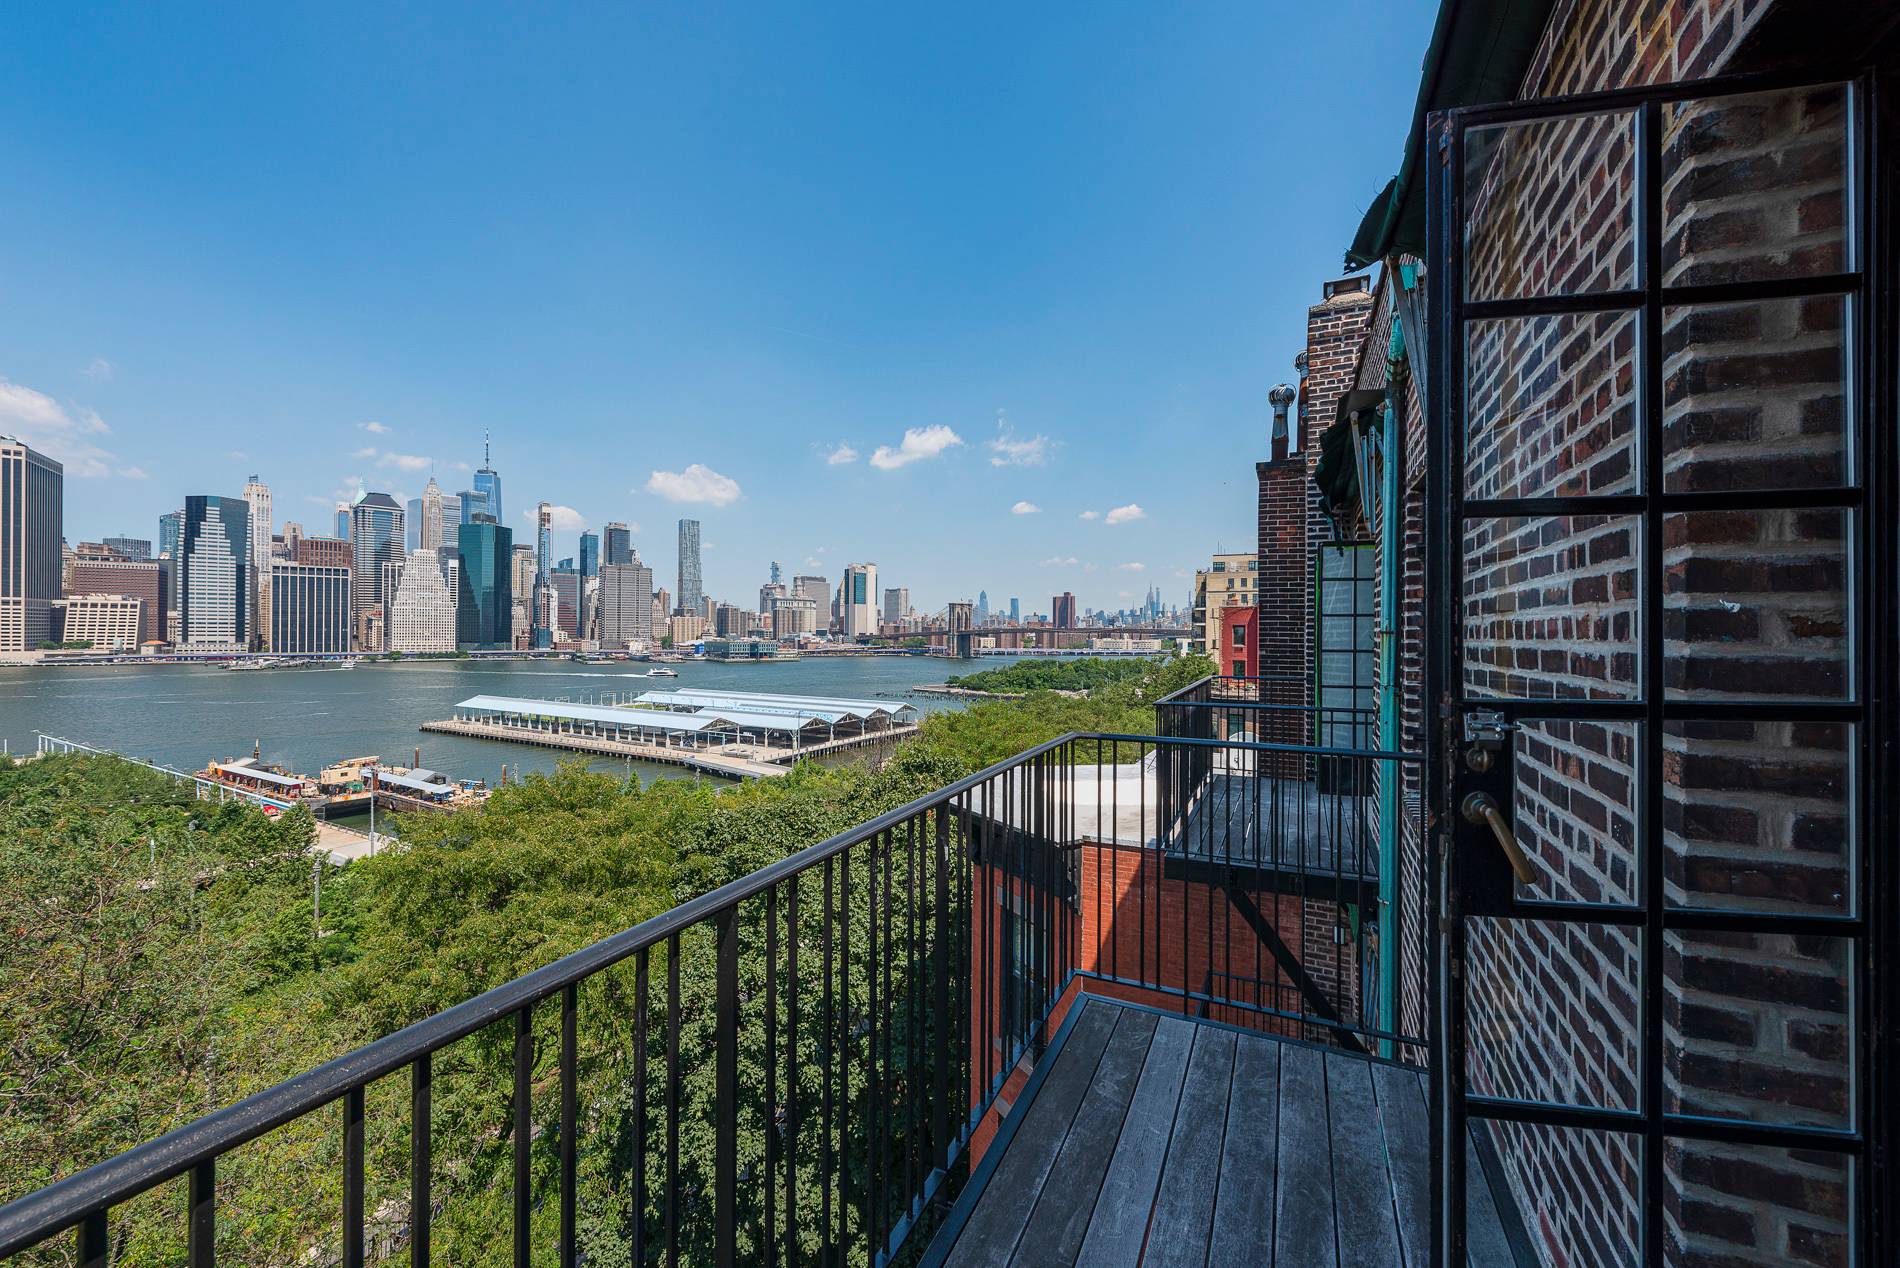 Wake up to your own private balcony with uninterrupted views of Manhattan, the Brooklyn Bridge Park, the Promenade, the iconic Brooklyn Bridge, the East River and the Statue of Liberty, ...